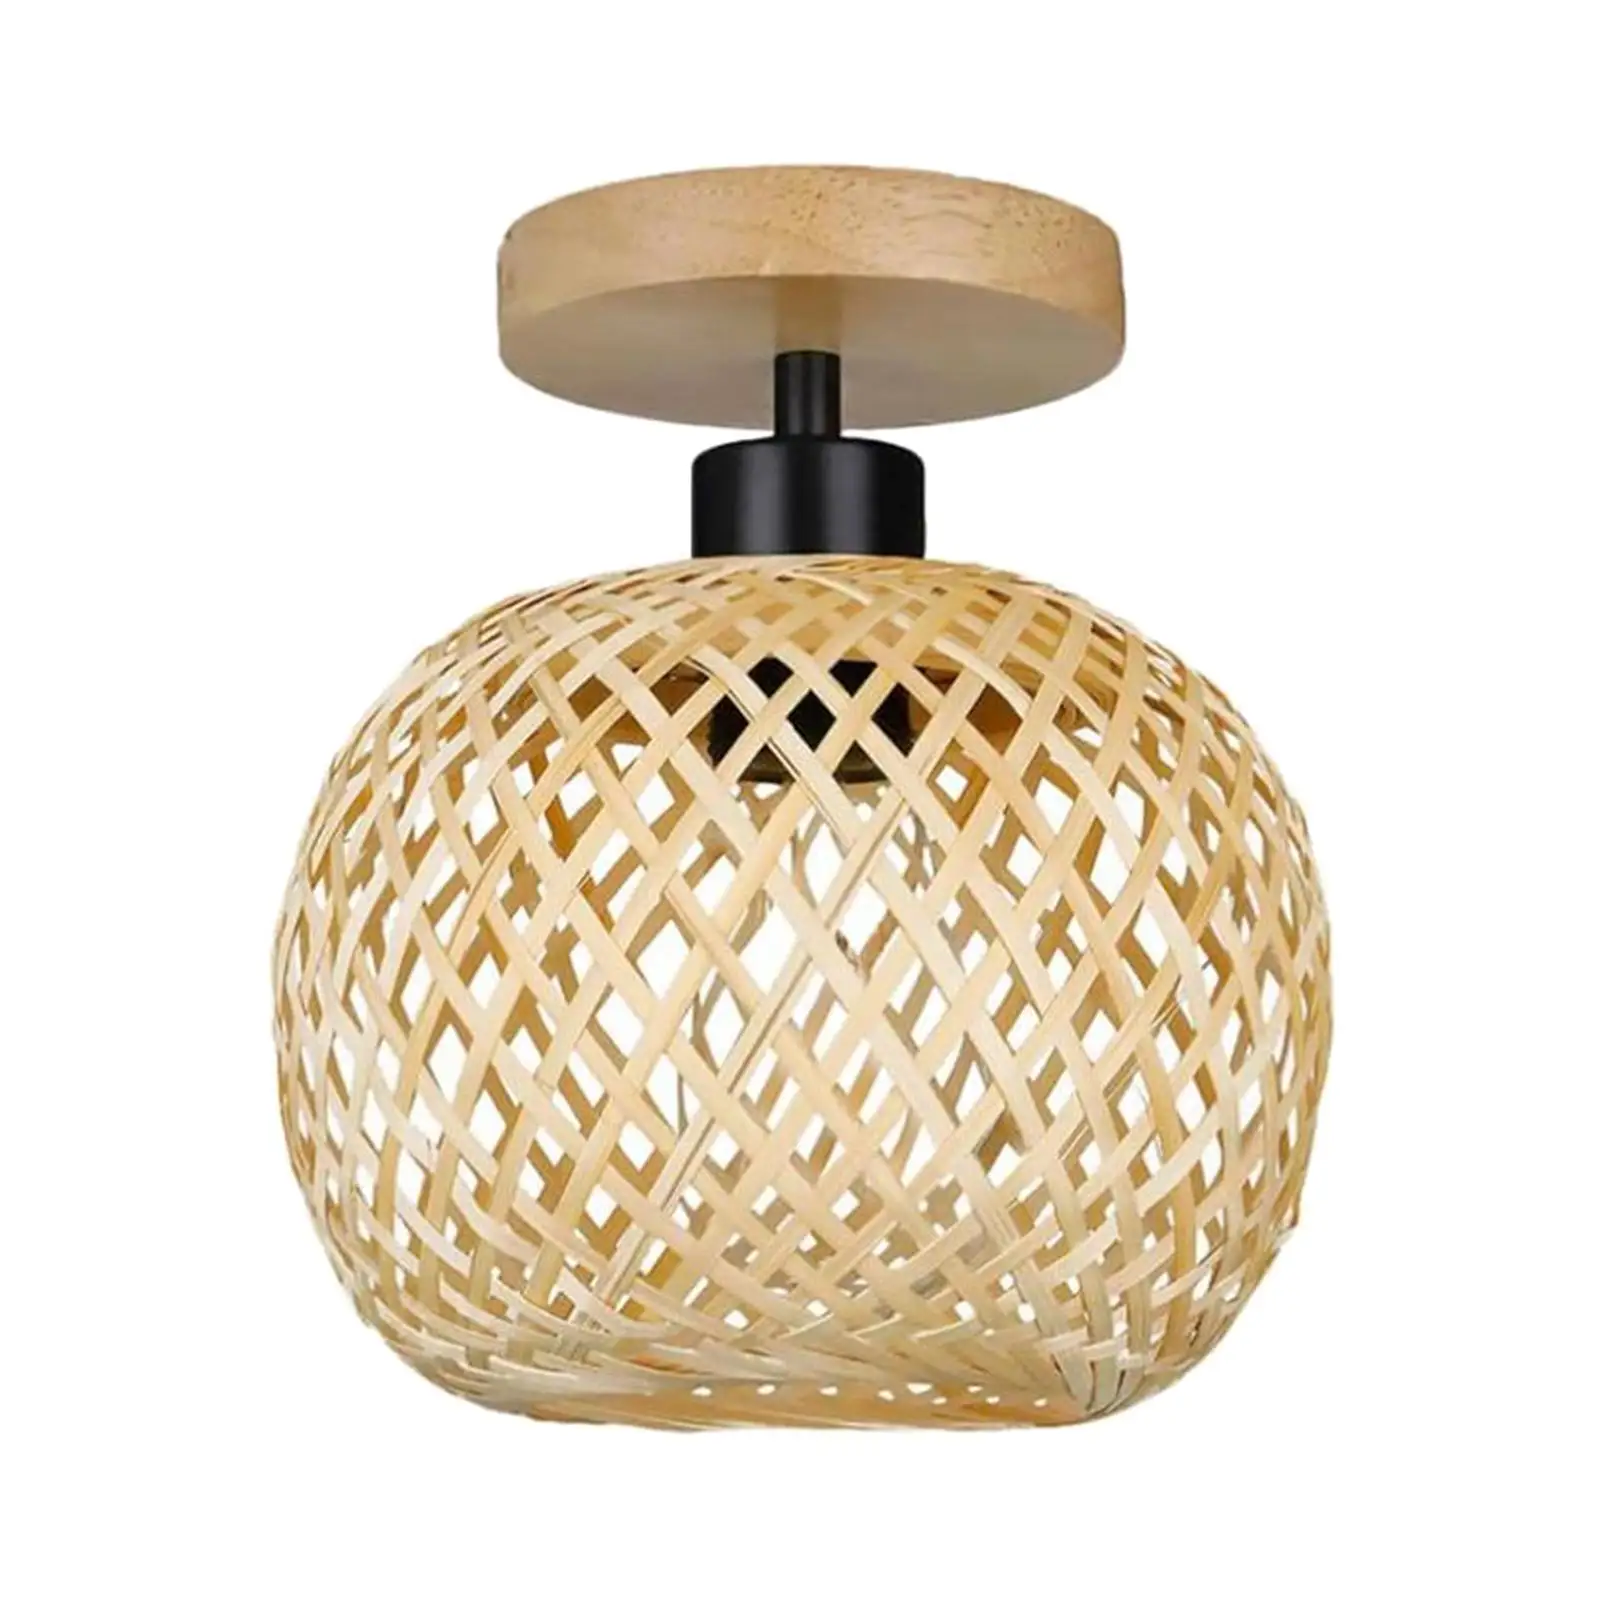 Bamboo Ball Lamp with No Bulb Hand Woven Rattan Chandelier E26 Kitchen Flush Mount Living Room Rustic Style Bambbo Pendant Light